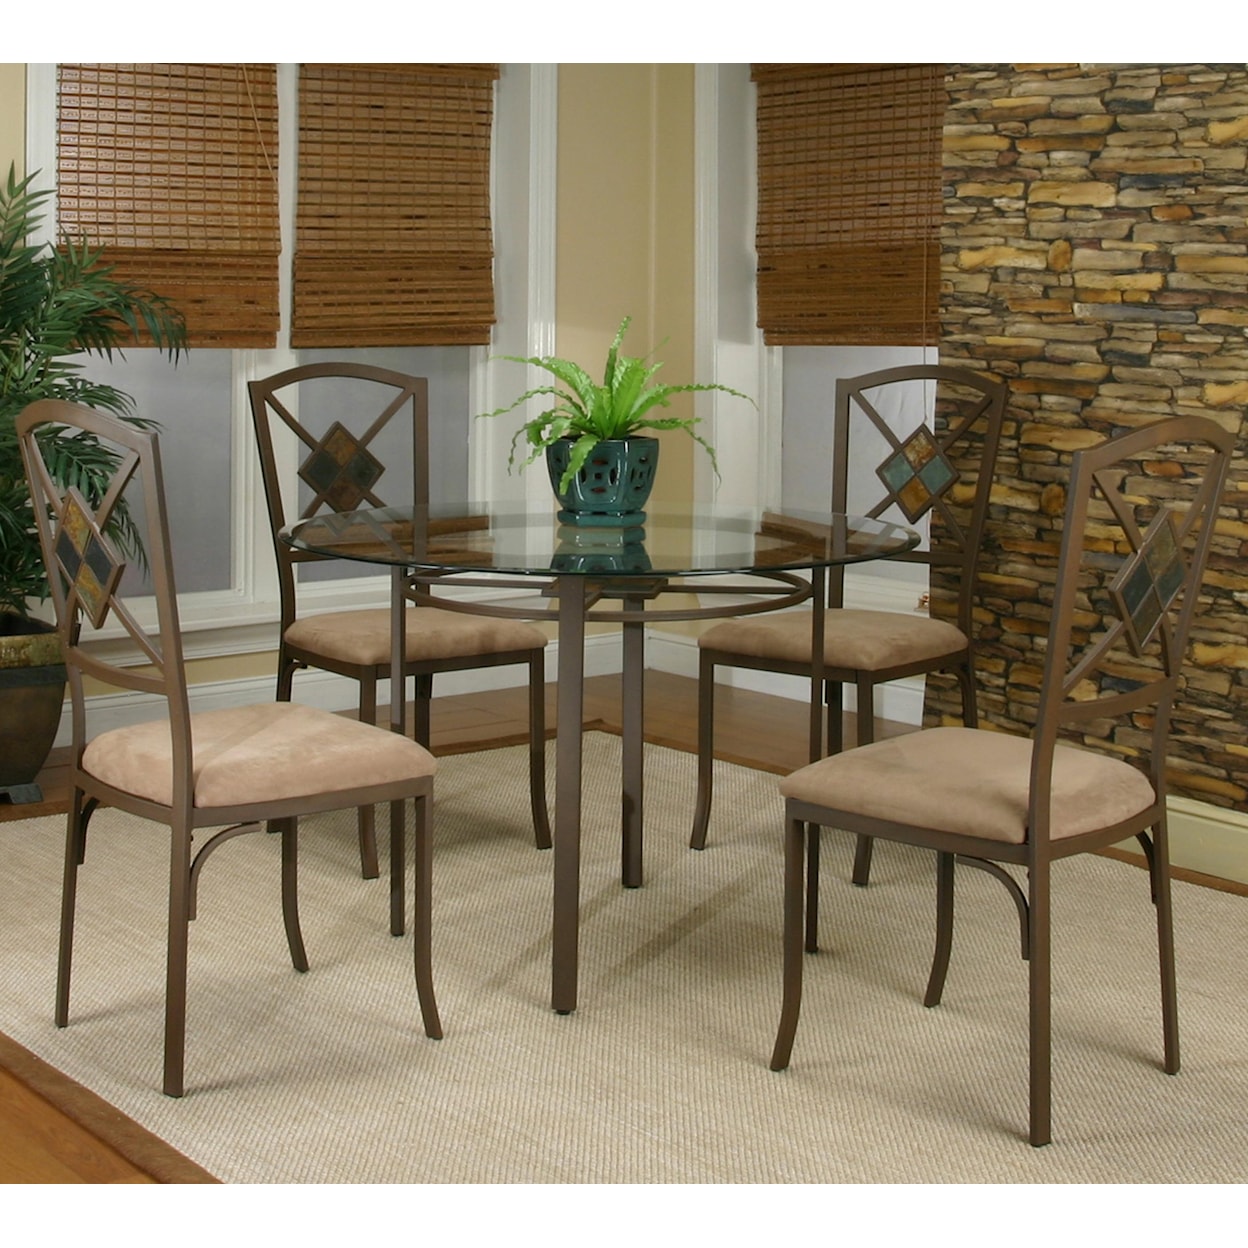 Cramco, Inc Cramco Trading Company - Piazza  Table and Chairs Set